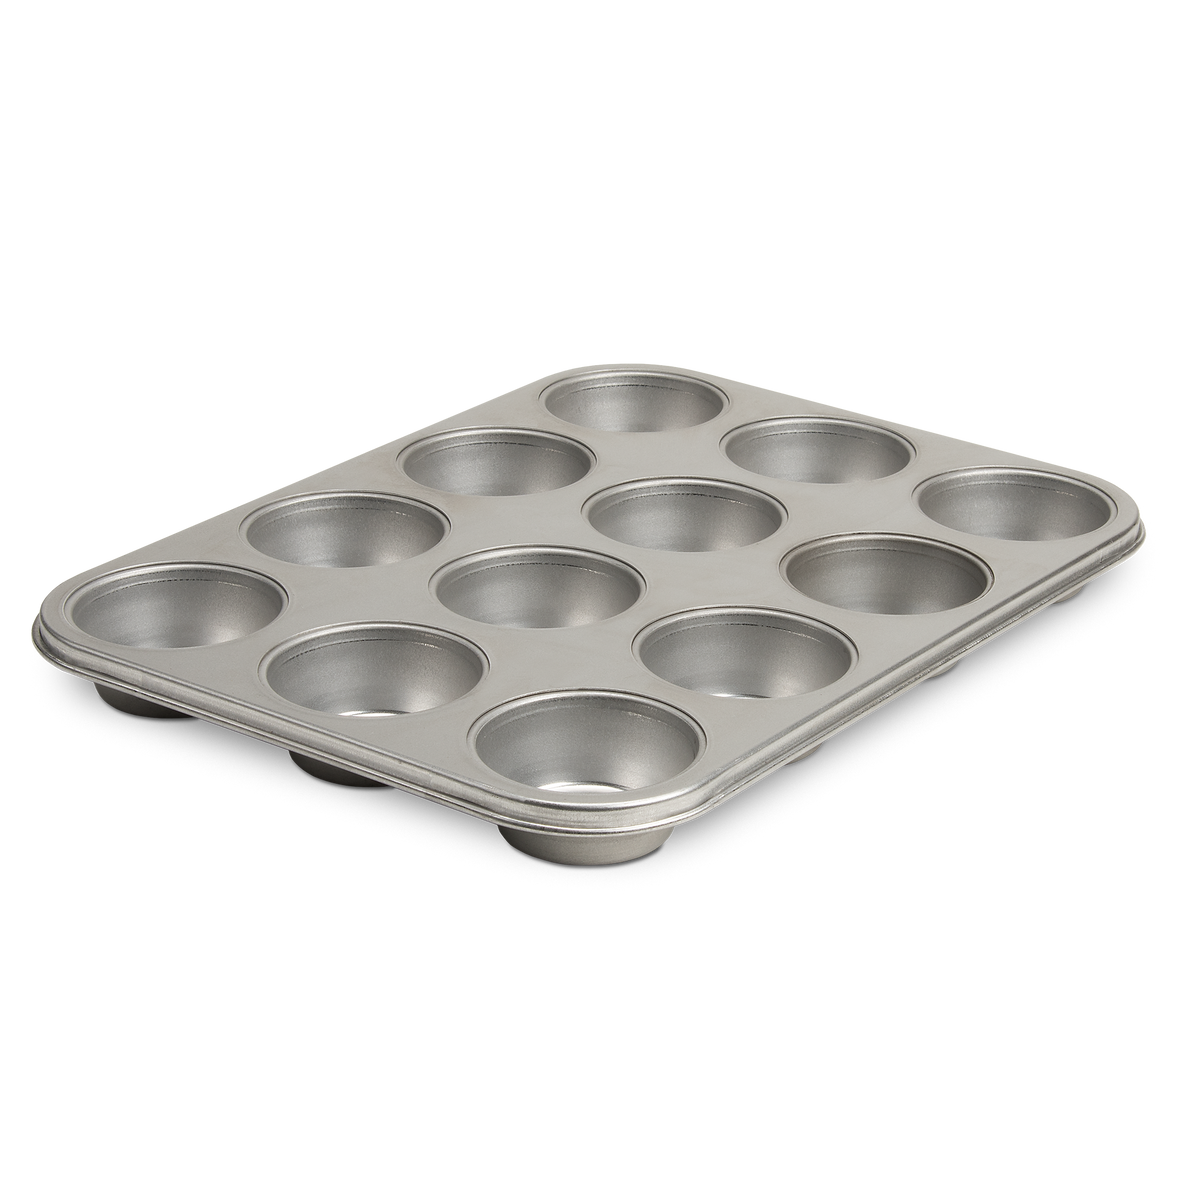 Product photo, 12 cup muffin pan, 3/4 perspective